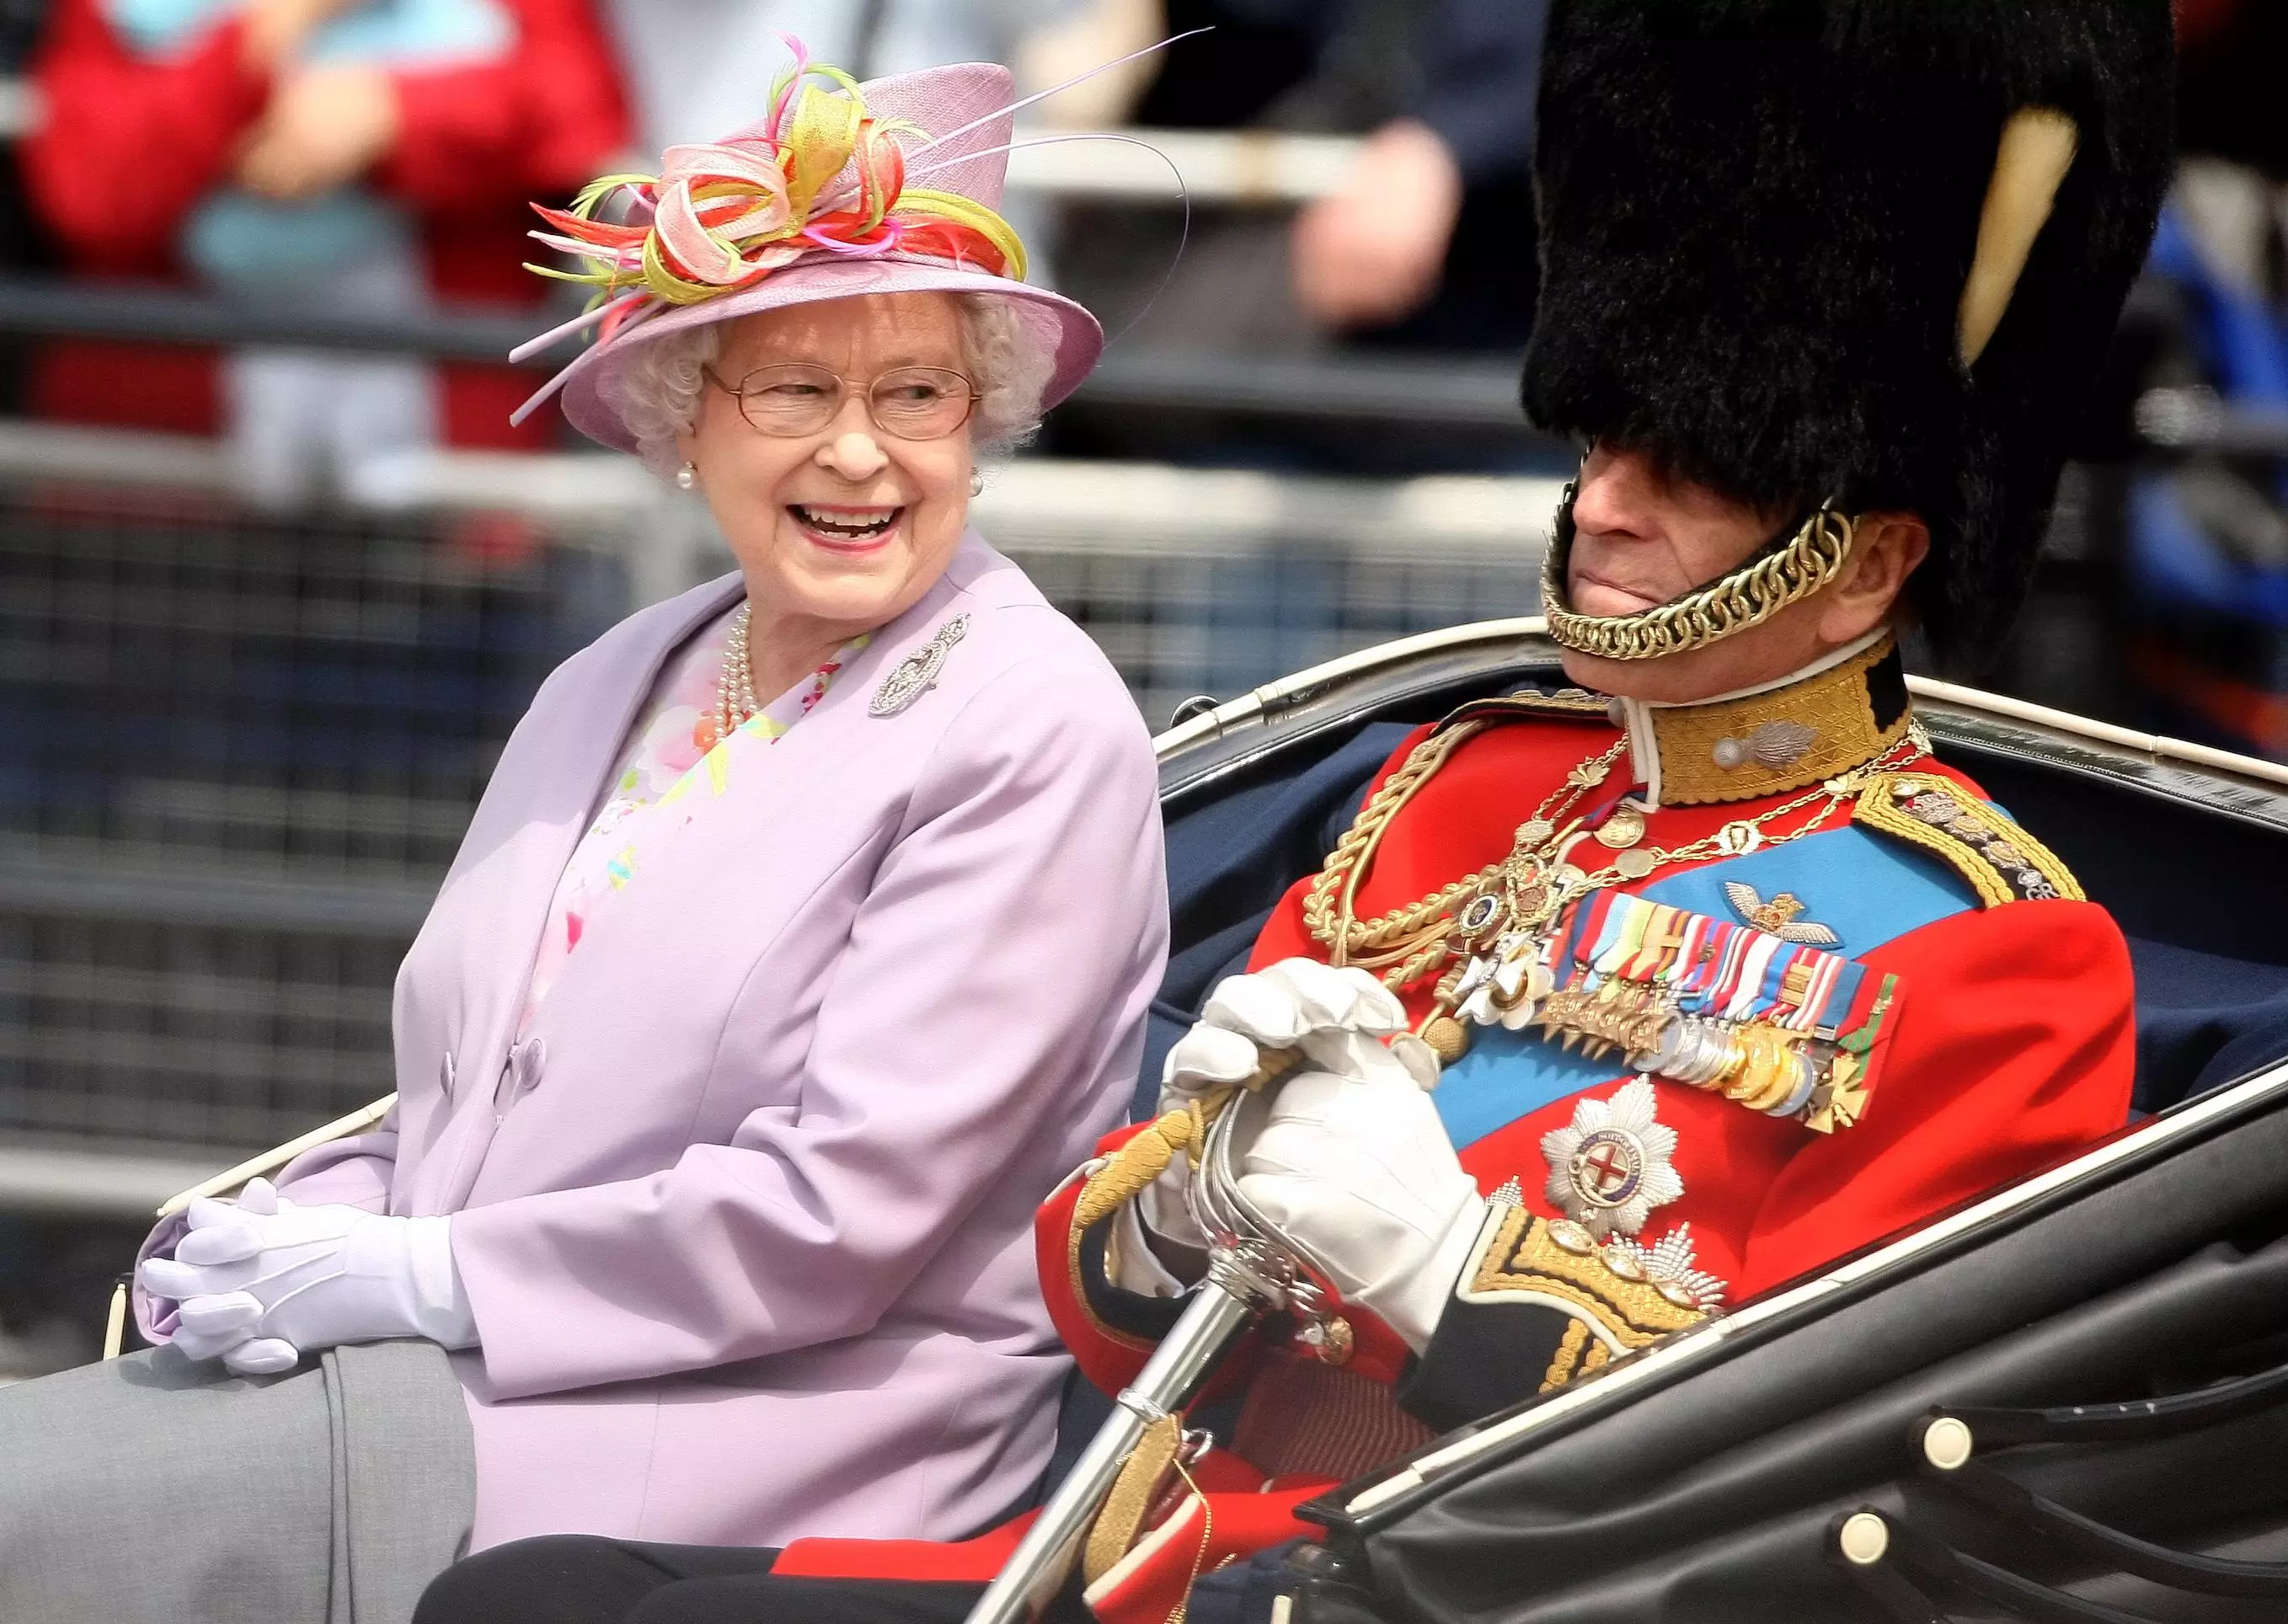 The Queen and Prince Philip have been together for 73 years (